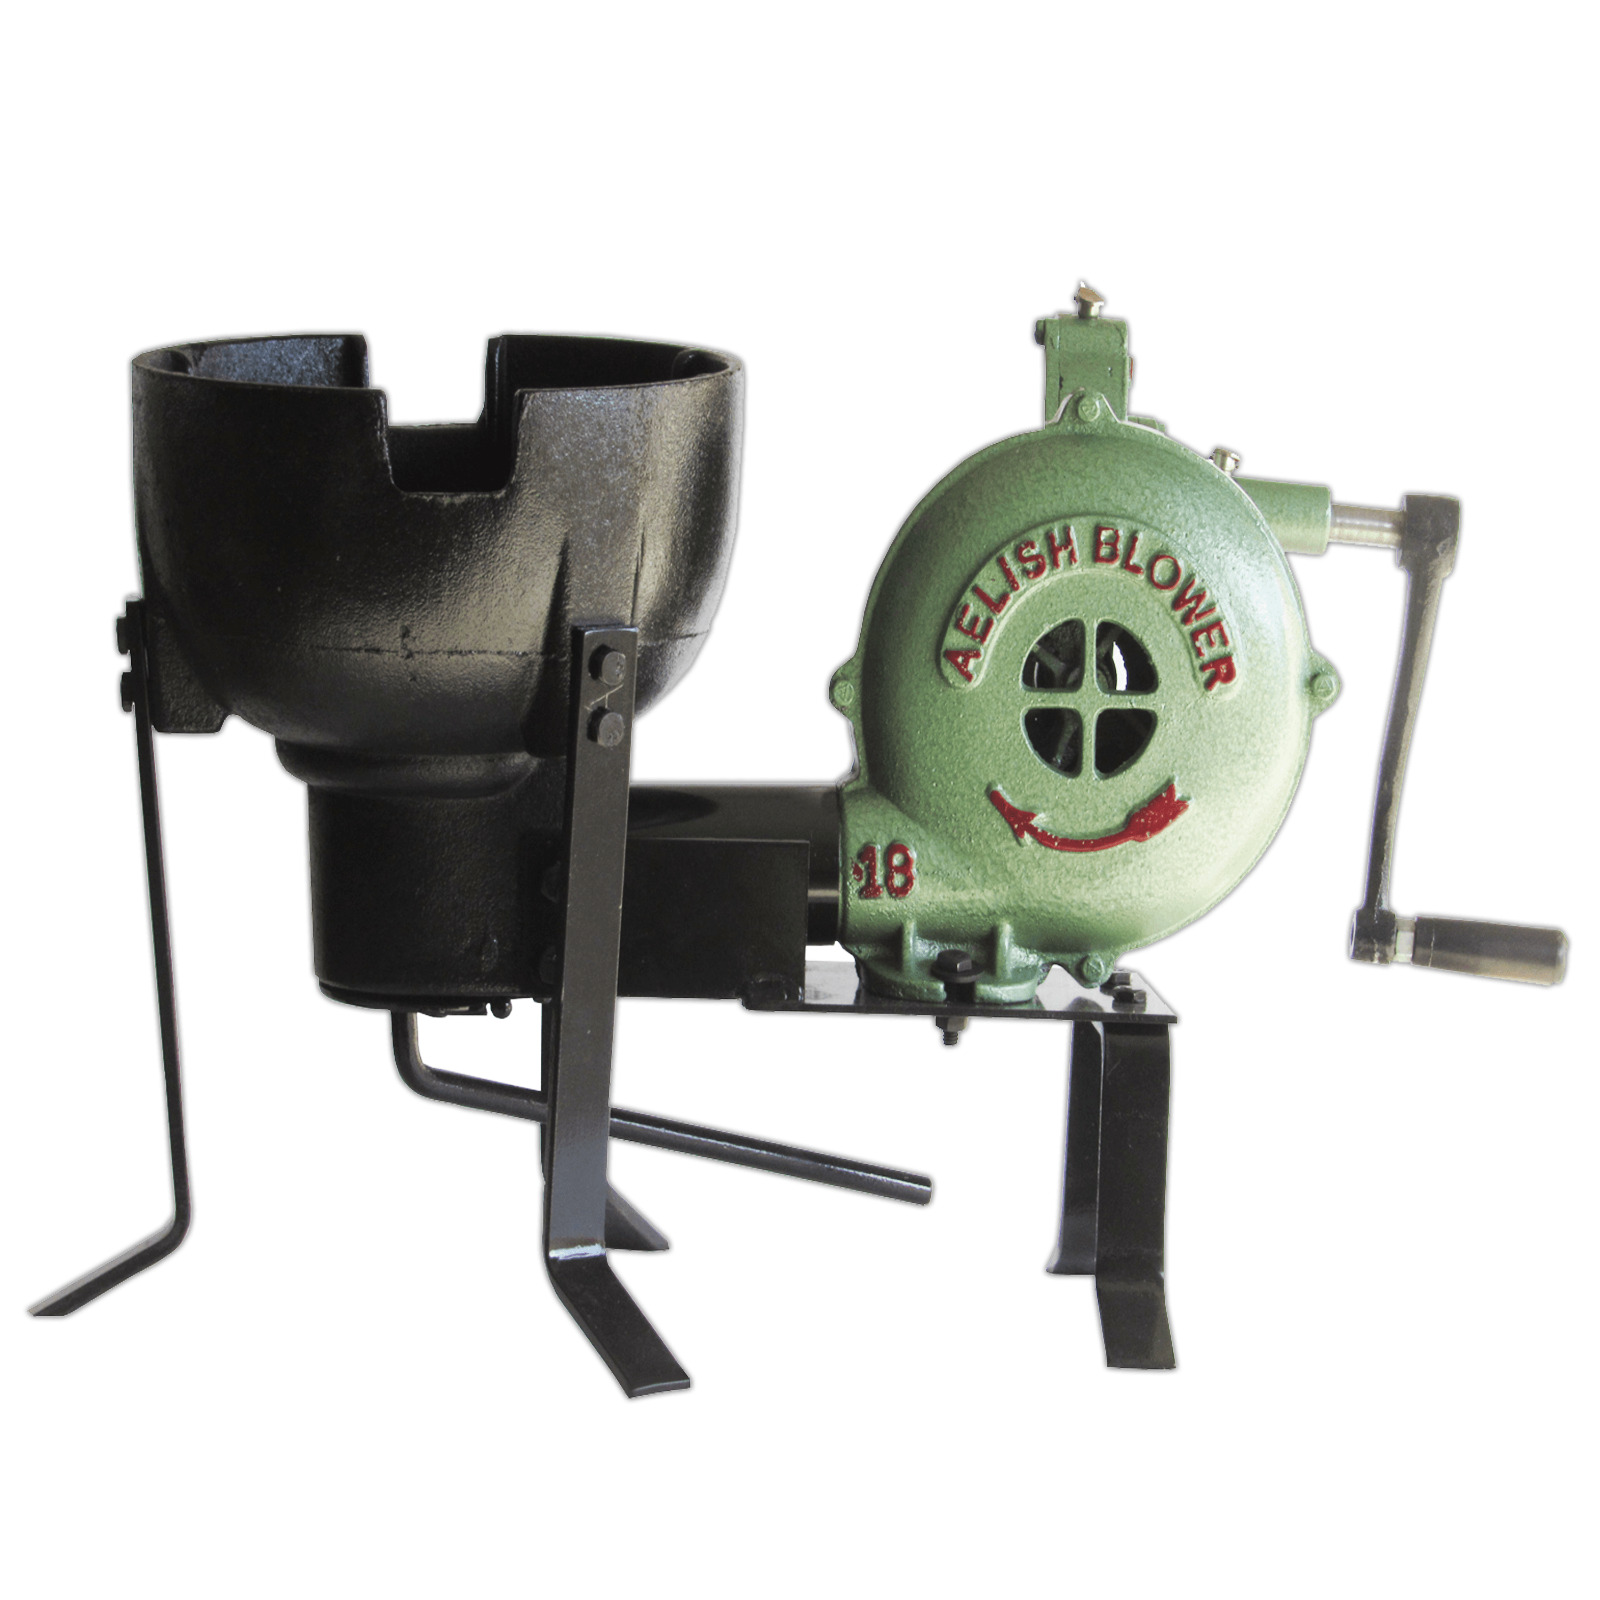 Hand Blower - Coal Forge Hand Crank Blower With Pedal Type Handle